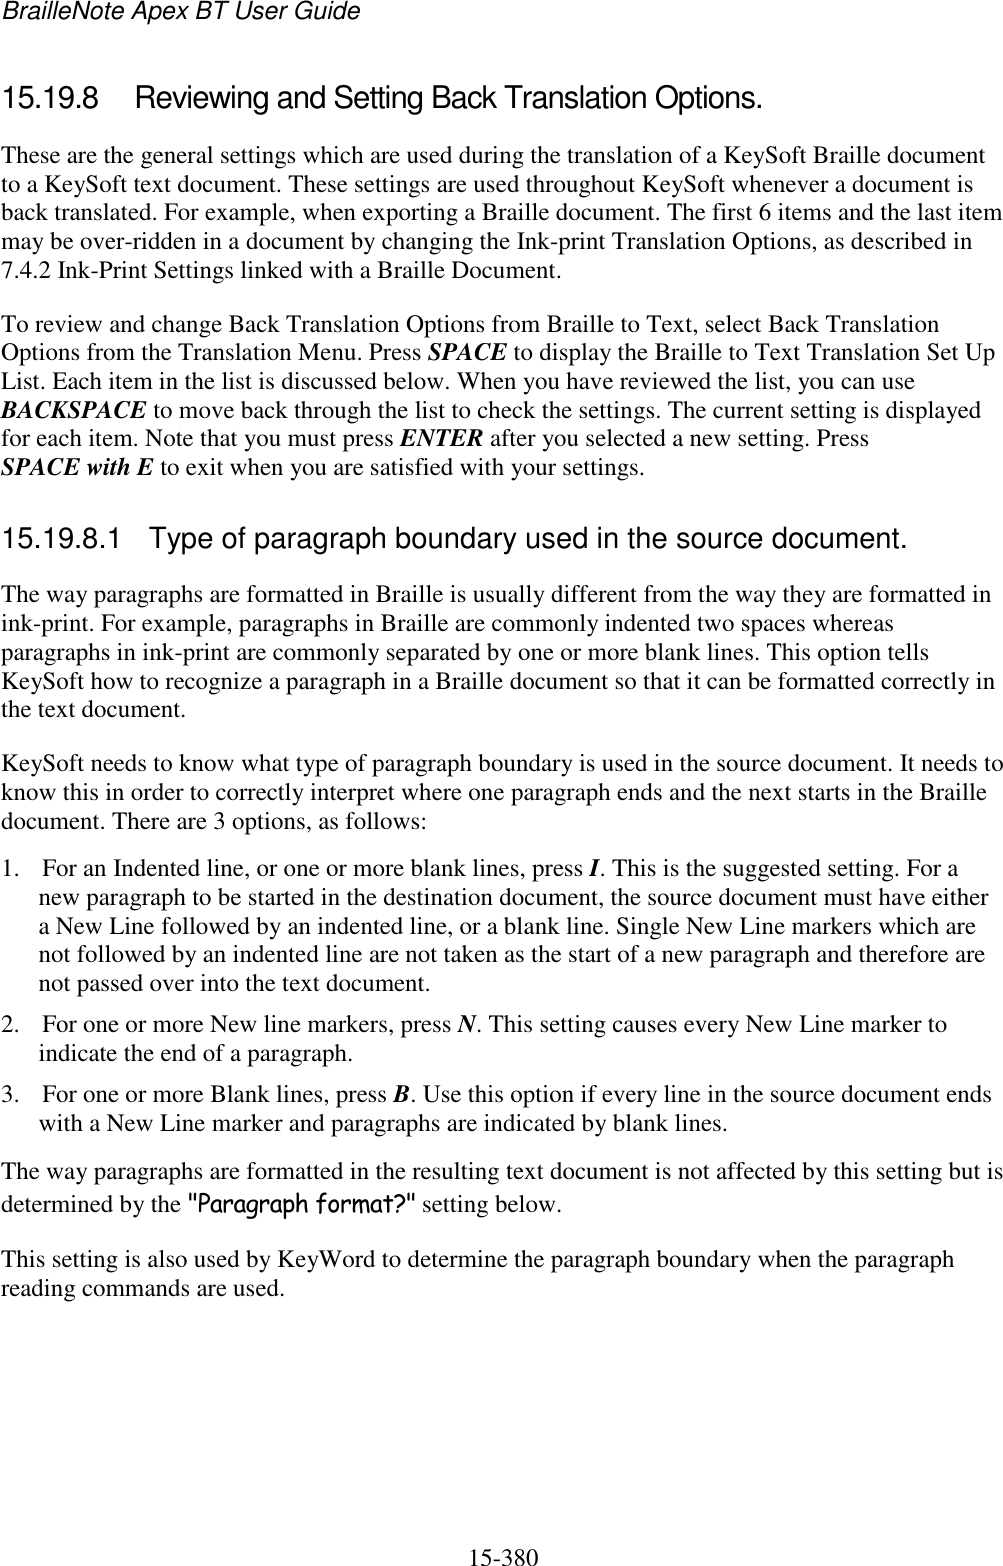 BrailleNote Apex BT User Guide   15-380   15.19.8  Reviewing and Setting Back Translation Options. These are the general settings which are used during the translation of a KeySoft Braille document to a KeySoft text document. These settings are used throughout KeySoft whenever a document is back translated. For example, when exporting a Braille document. The first 6 items and the last item may be over-ridden in a document by changing the Ink-print Translation Options, as described in 7.4.2 Ink-Print Settings linked with a Braille Document. To review and change Back Translation Options from Braille to Text, select Back Translation Options from the Translation Menu. Press SPACE to display the Braille to Text Translation Set Up List. Each item in the list is discussed below. When you have reviewed the list, you can use BACKSPACE to move back through the list to check the settings. The current setting is displayed for each item. Note that you must press ENTER after you selected a new setting. Press SPACE with E to exit when you are satisfied with your settings.  15.19.8.1  Type of paragraph boundary used in the source document. The way paragraphs are formatted in Braille is usually different from the way they are formatted in ink-print. For example, paragraphs in Braille are commonly indented two spaces whereas paragraphs in ink-print are commonly separated by one or more blank lines. This option tells KeySoft how to recognize a paragraph in a Braille document so that it can be formatted correctly in the text document. KeySoft needs to know what type of paragraph boundary is used in the source document. It needs to know this in order to correctly interpret where one paragraph ends and the next starts in the Braille document. There are 3 options, as follows: 1. For an Indented line, or one or more blank lines, press I. This is the suggested setting. For a new paragraph to be started in the destination document, the source document must have either a New Line followed by an indented line, or a blank line. Single New Line markers which are not followed by an indented line are not taken as the start of a new paragraph and therefore are not passed over into the text document. 2. For one or more New line markers, press N. This setting causes every New Line marker to indicate the end of a paragraph. 3. For one or more Blank lines, press B. Use this option if every line in the source document ends with a New Line marker and paragraphs are indicated by blank lines. The way paragraphs are formatted in the resulting text document is not affected by this setting but is determined by the &quot;Paragraph format?&quot; setting below. This setting is also used by KeyWord to determine the paragraph boundary when the paragraph reading commands are used.  